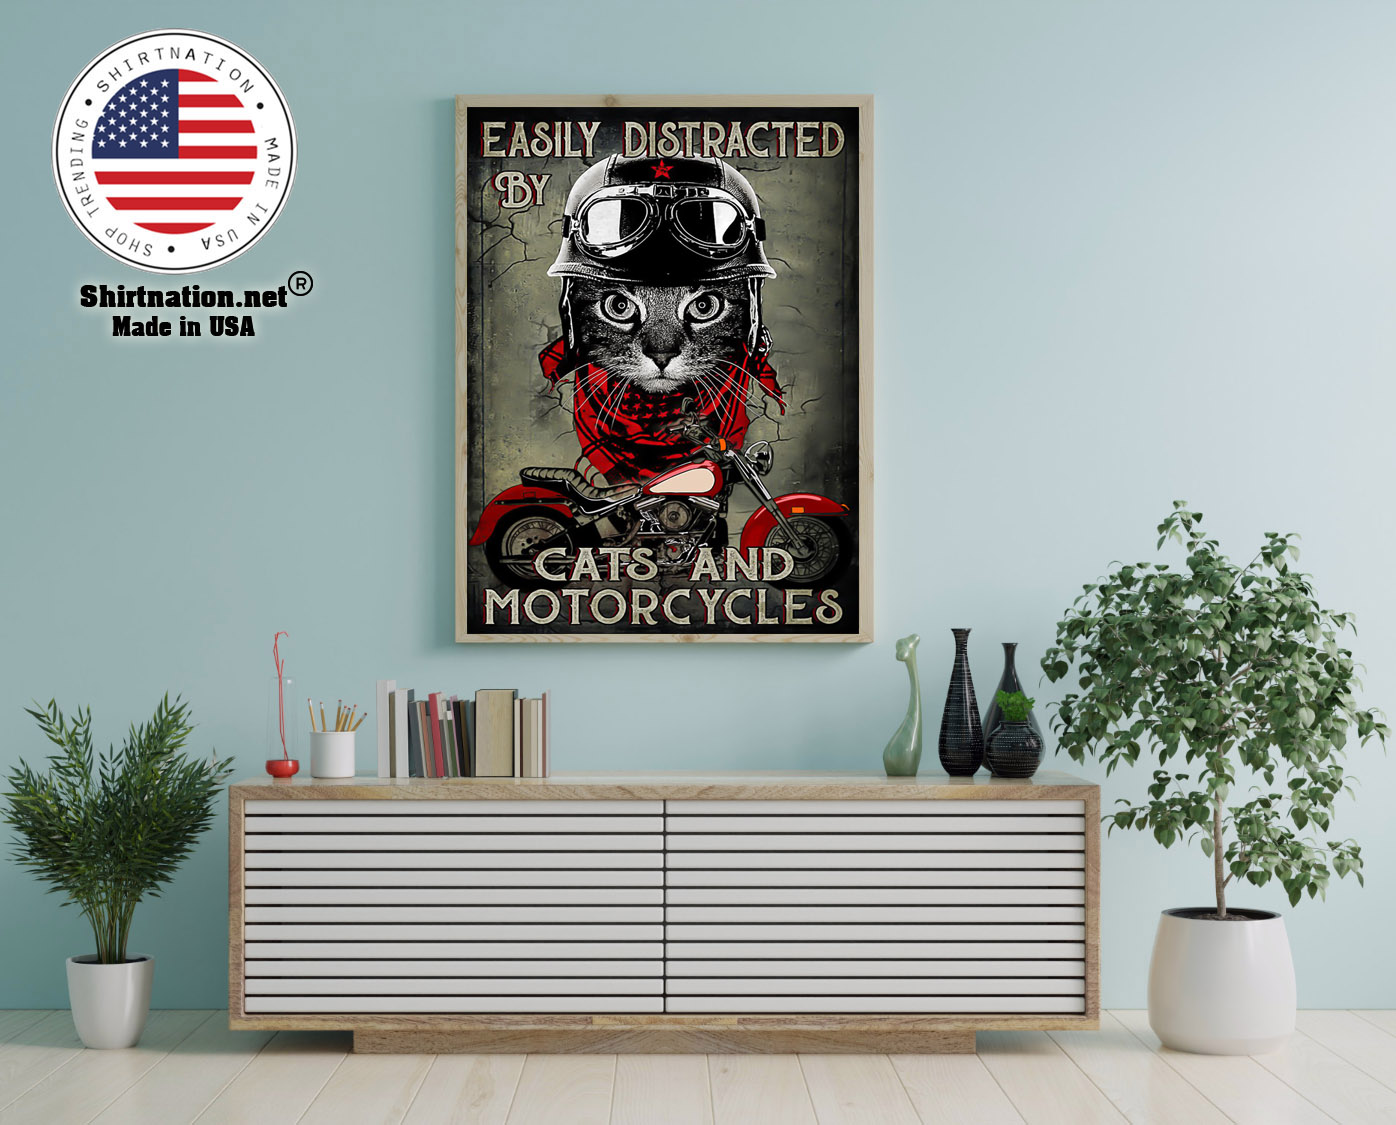 Easily distracted by cats and motorcycles poster 12 1